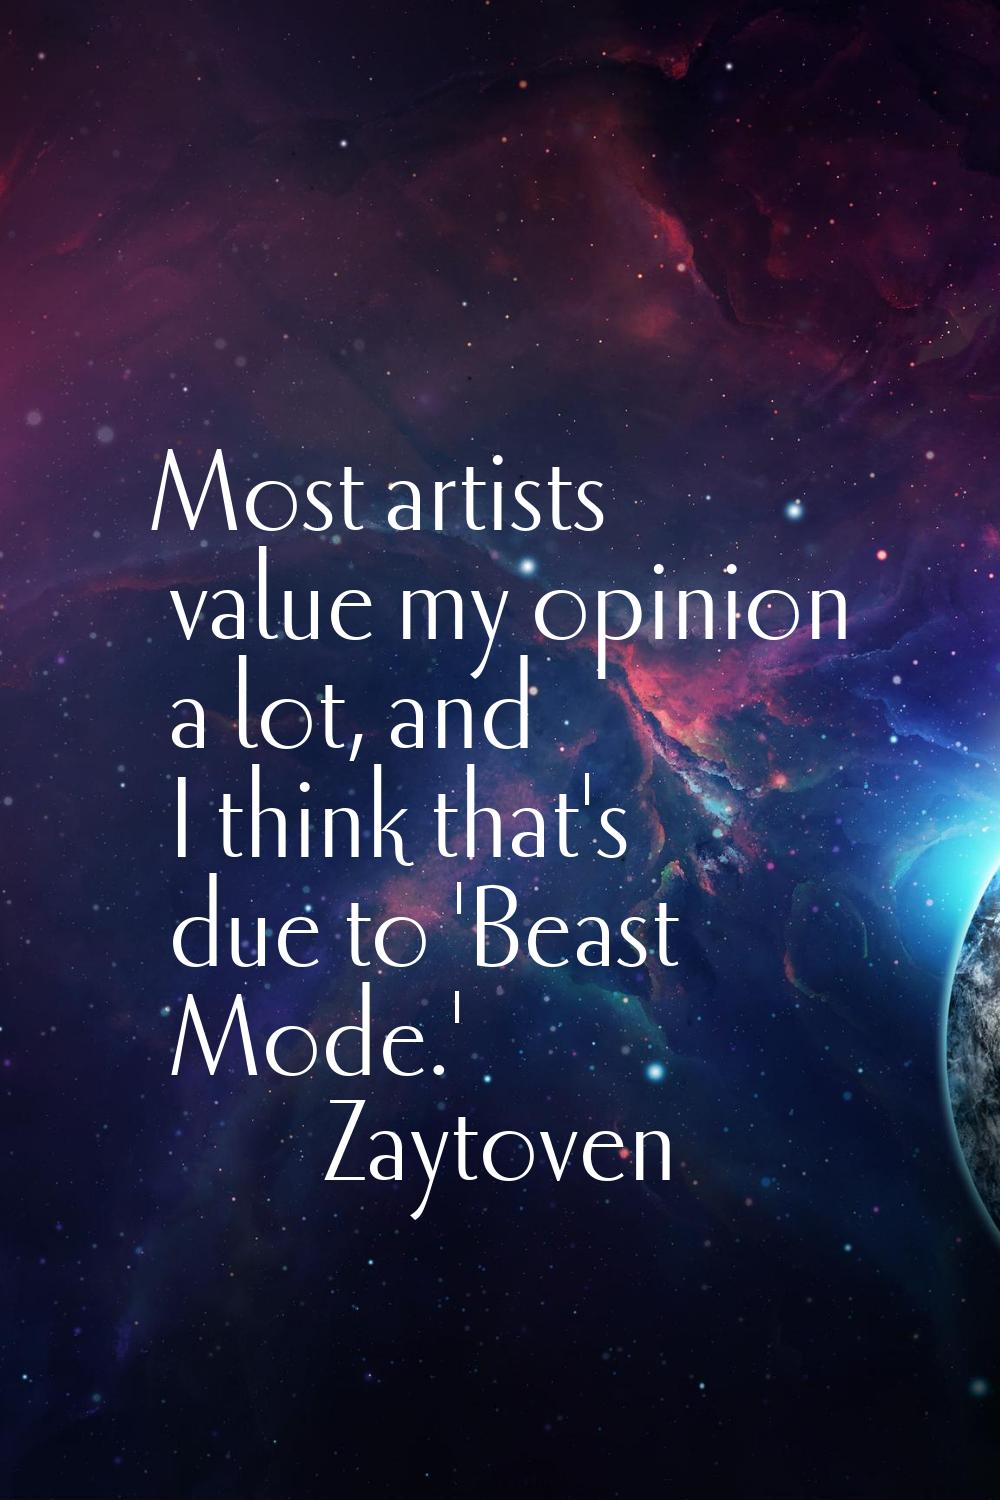 Most artists value my opinion a lot, and I think that's due to 'Beast Mode.'